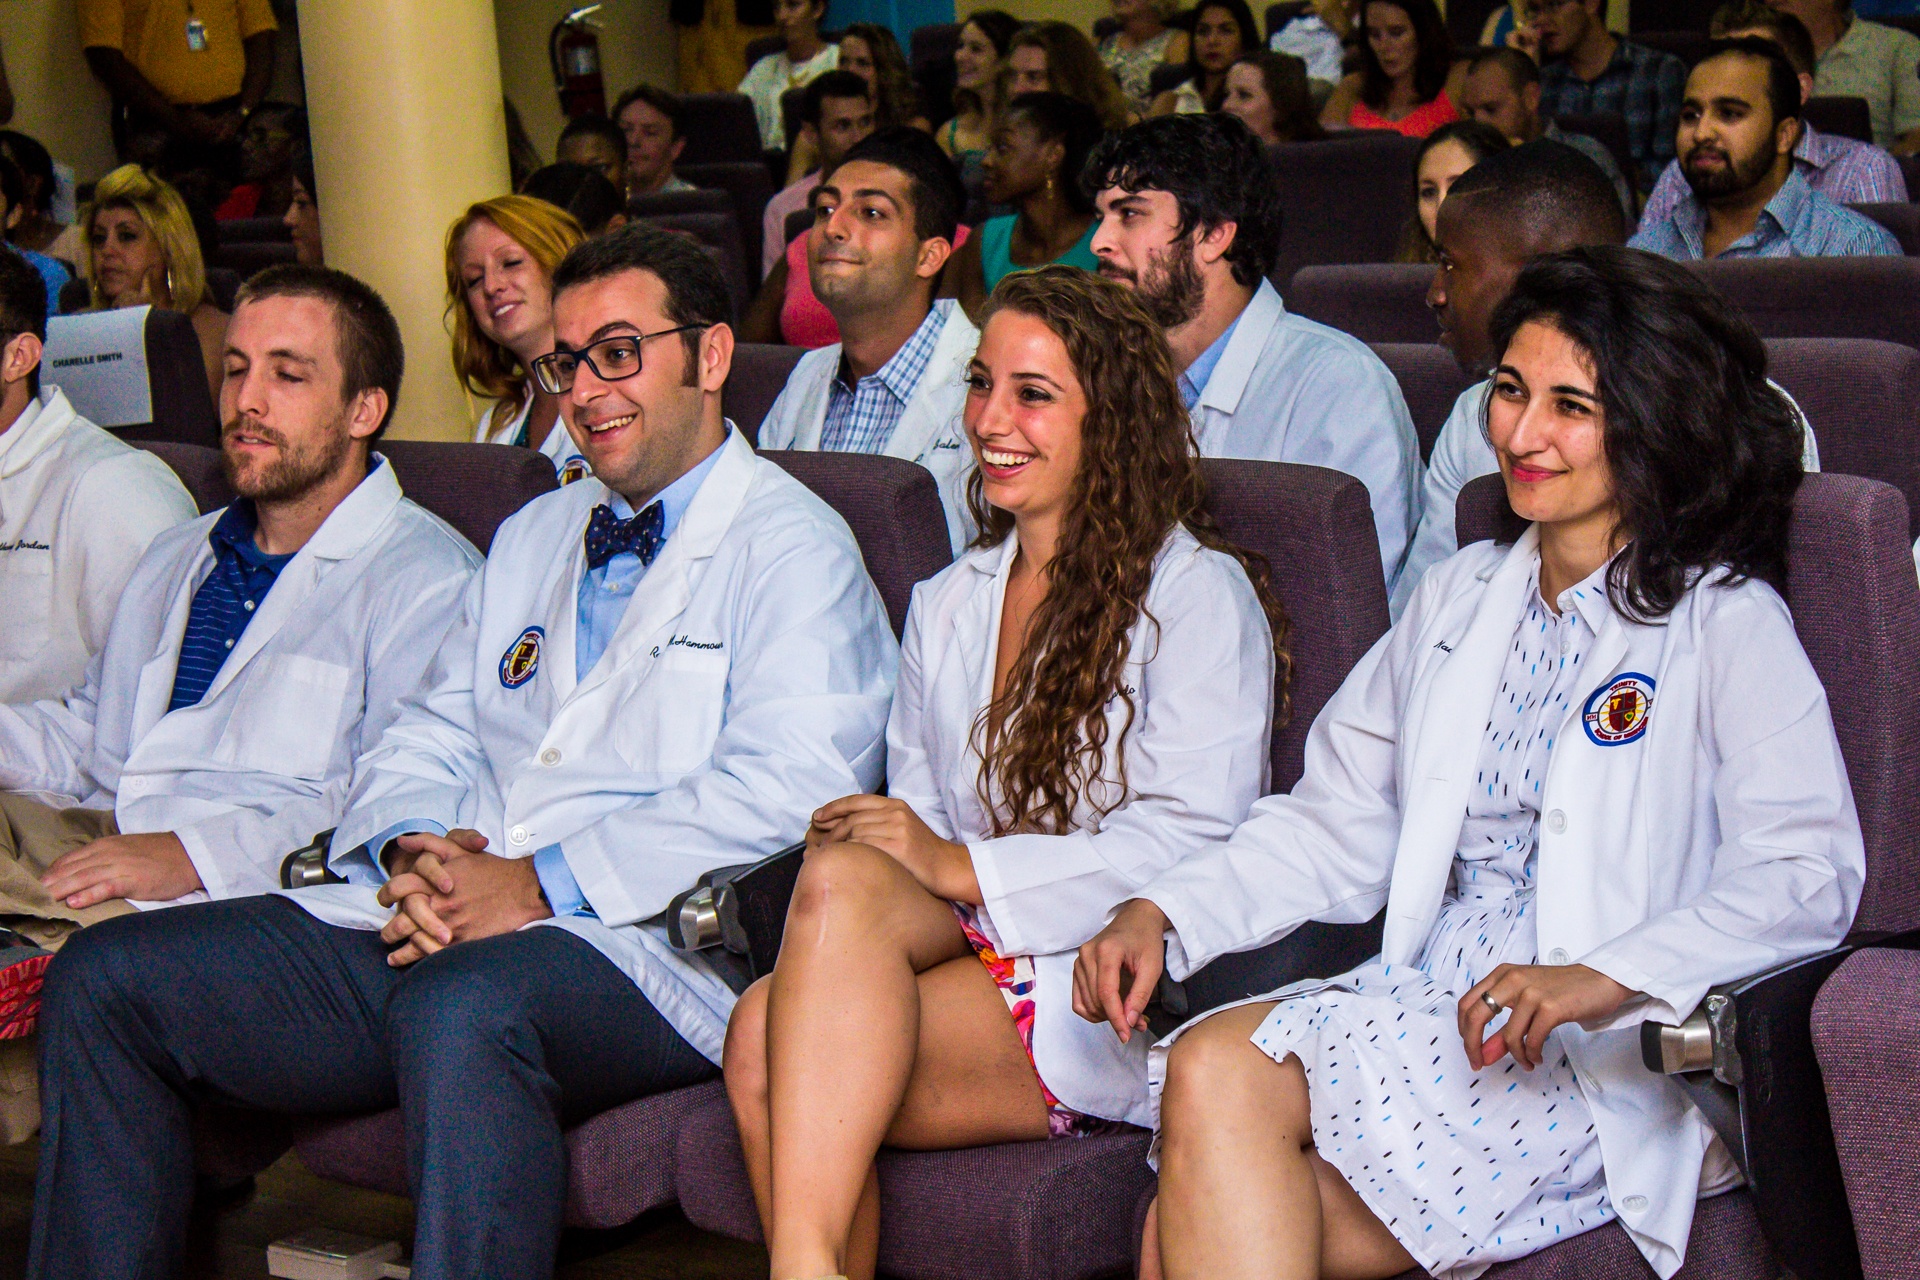 White Coat Ceremony for Fall 2015